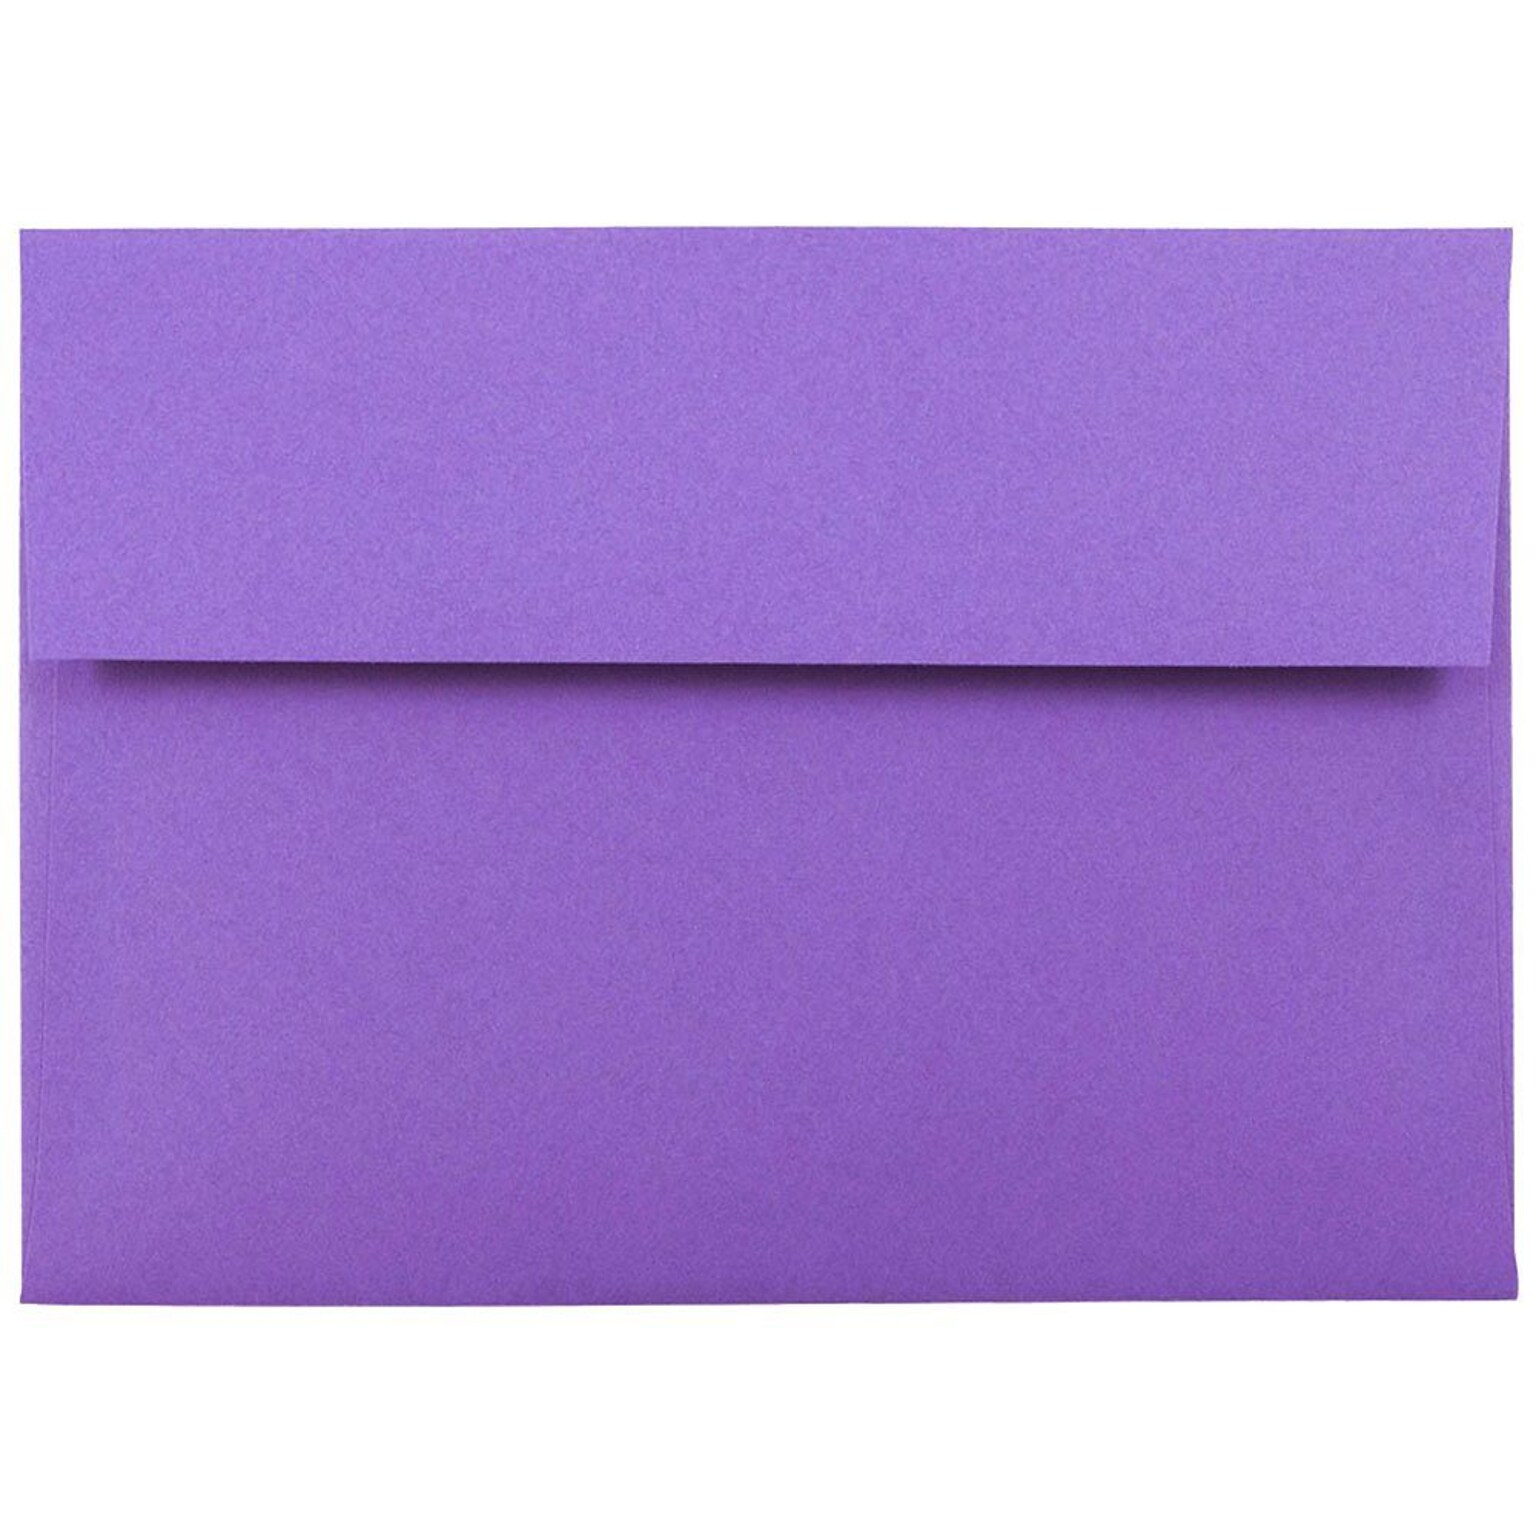 JAM Paper A7 Colored Invitation Envelopes, 5 1/4 x 7 1/4, Violet Purple Recycled, 50/Pack (80278I)